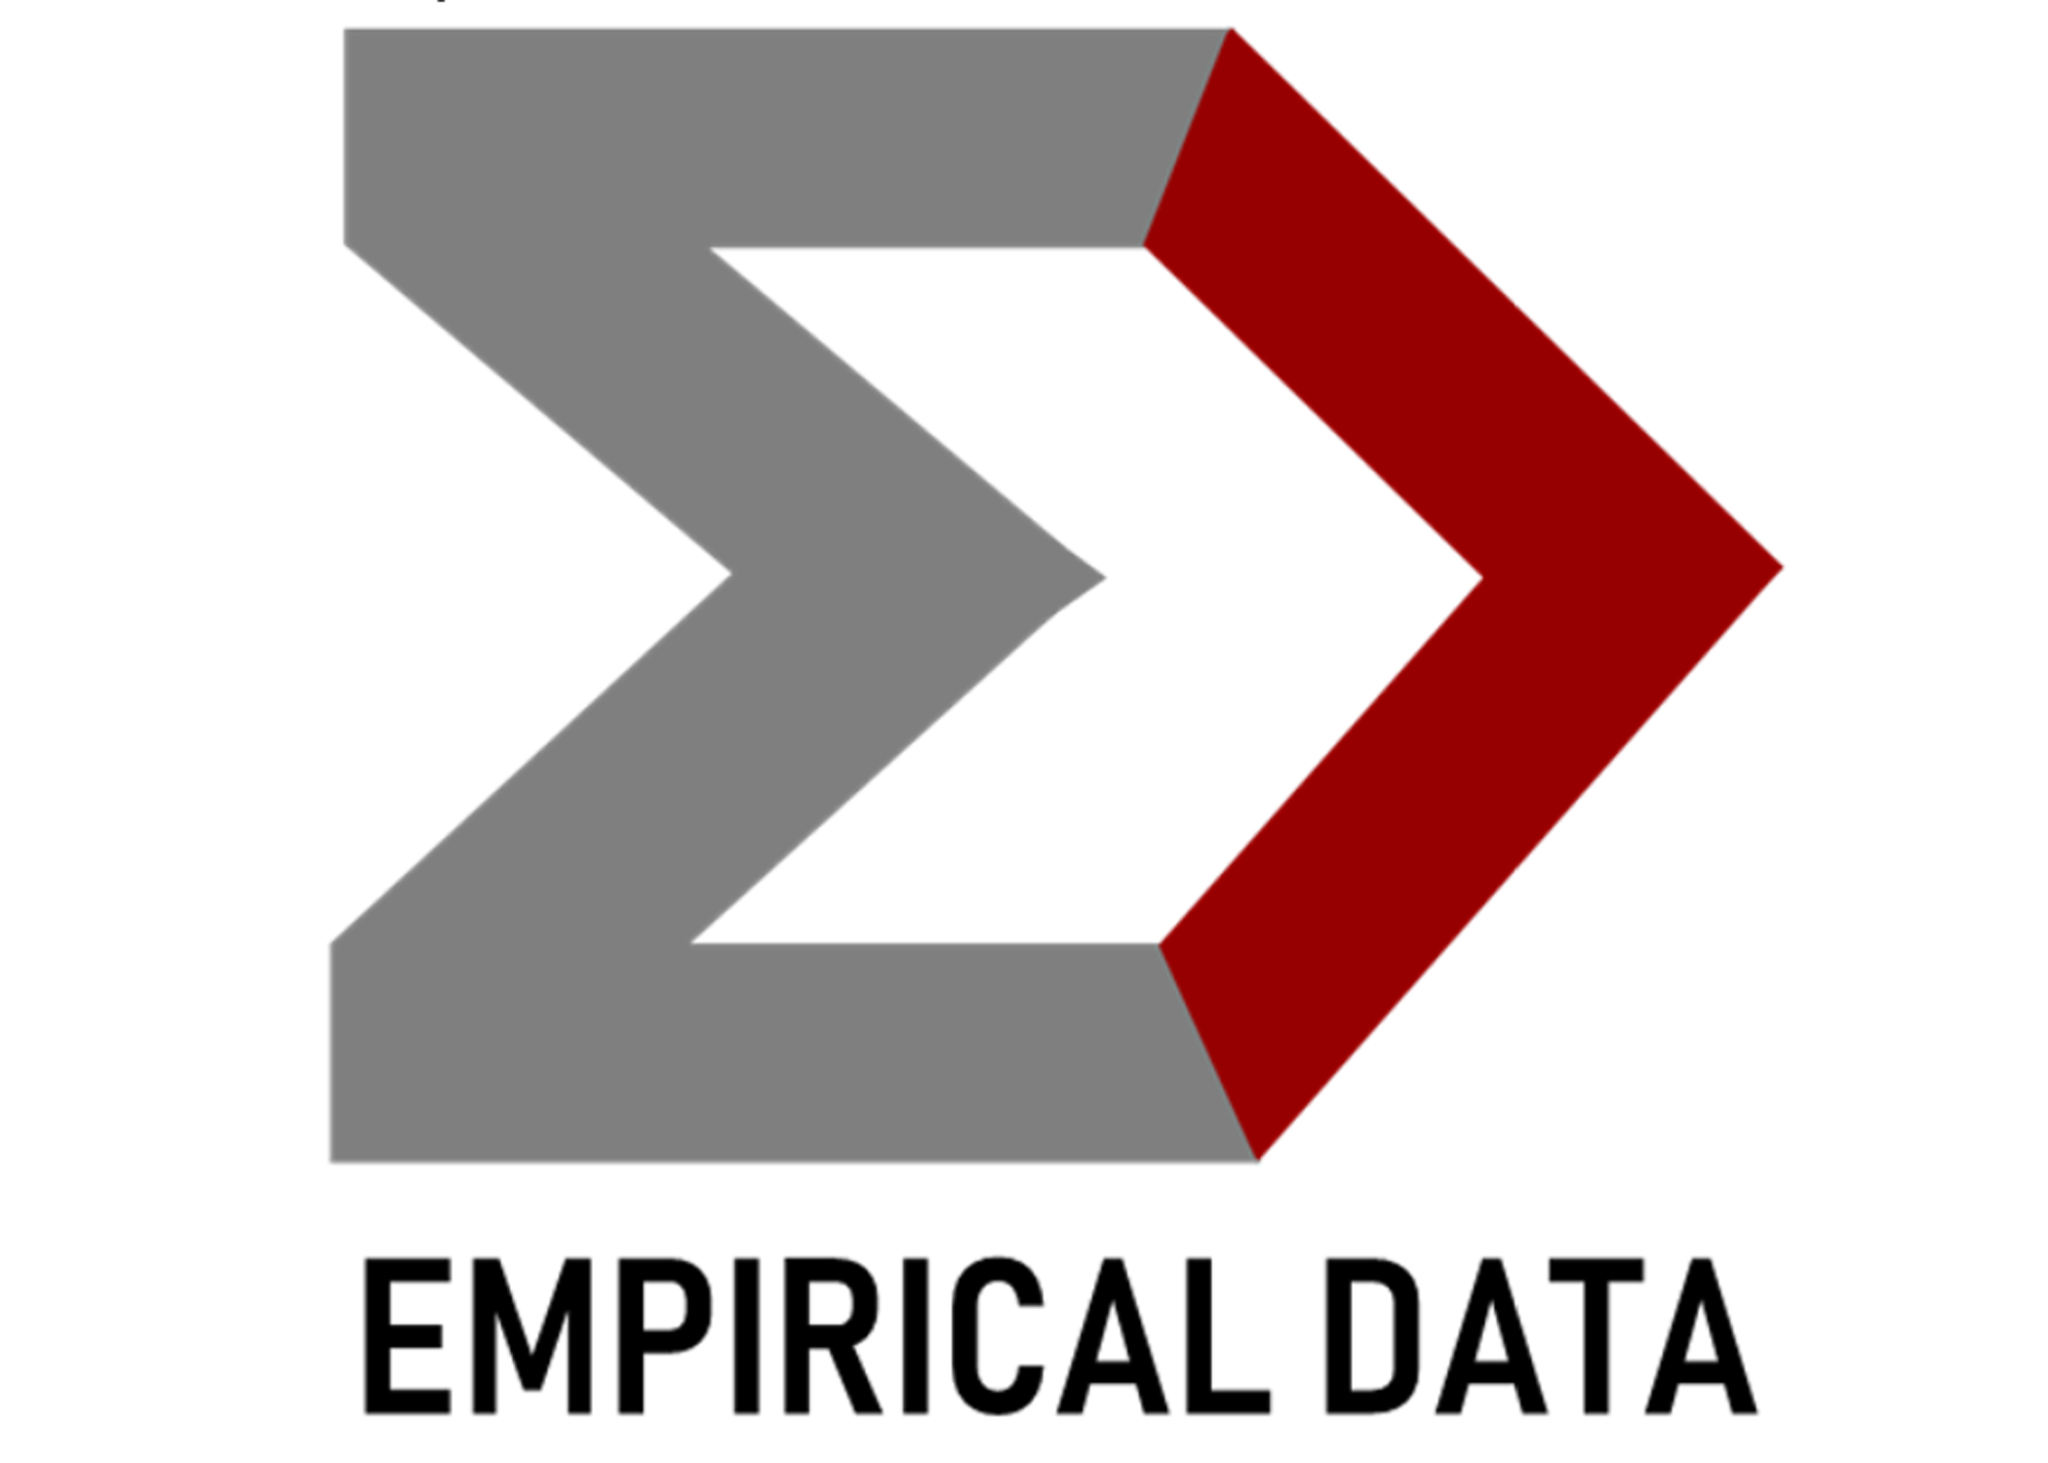 RedShift Solution announced by Empirical Data for Transparent CSR Operation